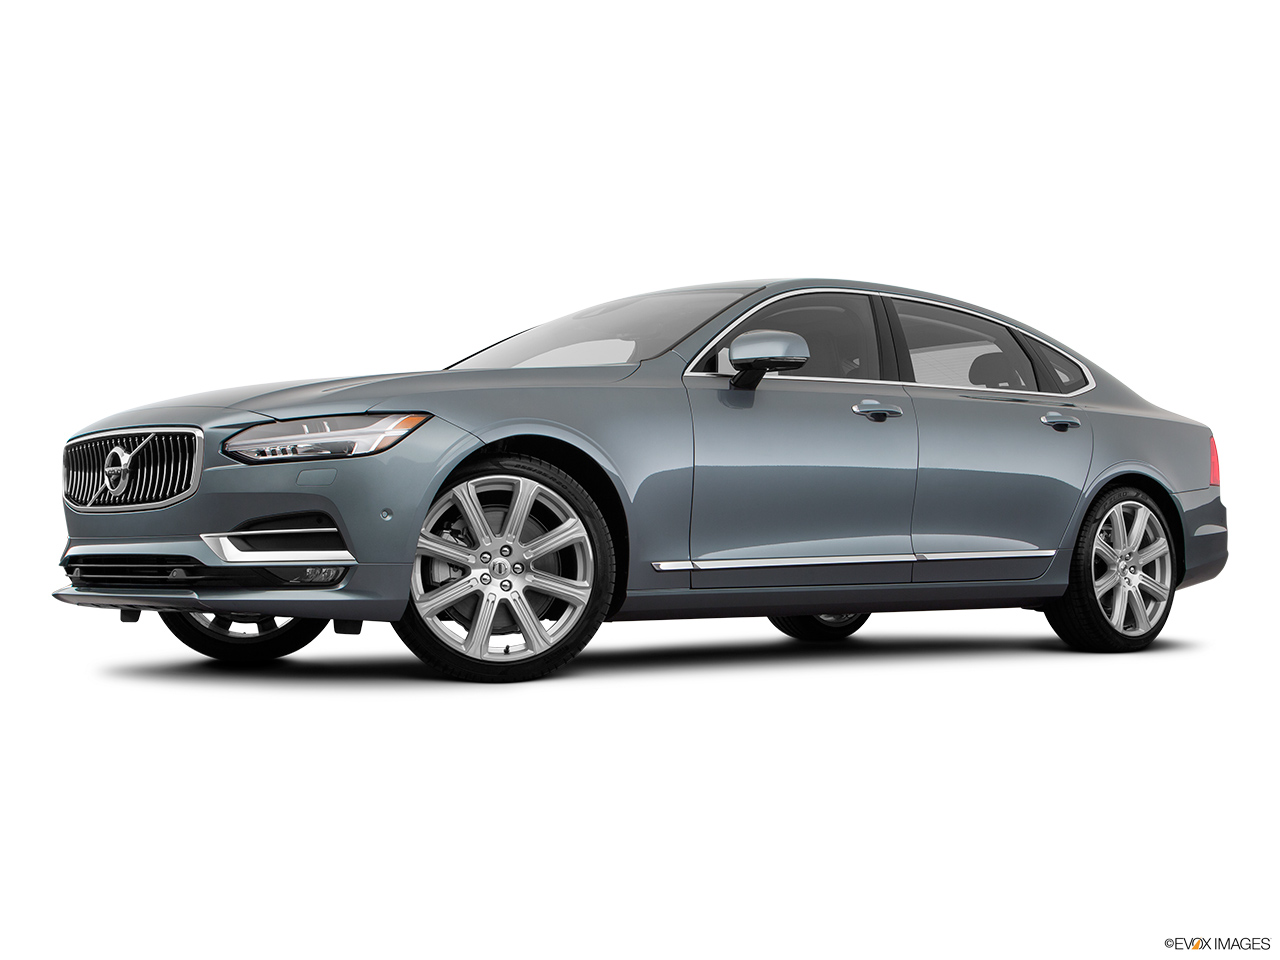 2020 Volvo S90 T6 Inscription Low/wide front 5/8. 